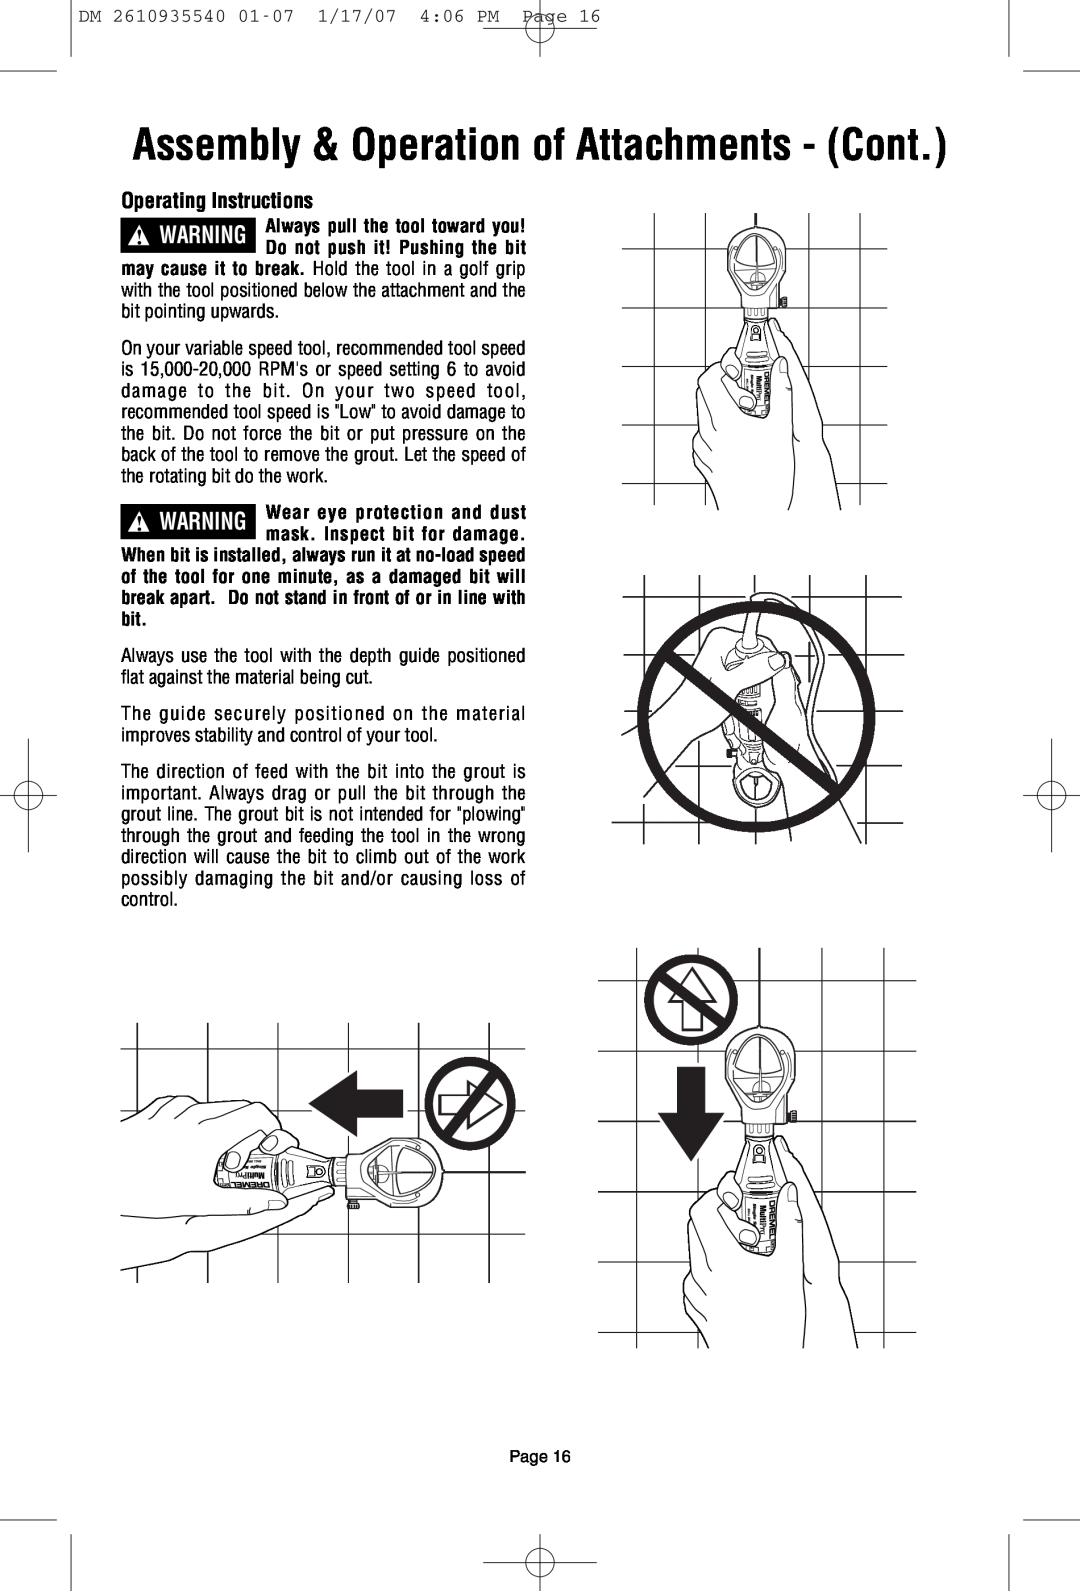 Dremel F013039519 owner manual Operating Instructions, Assembly & Operation of Attachments - Cont 